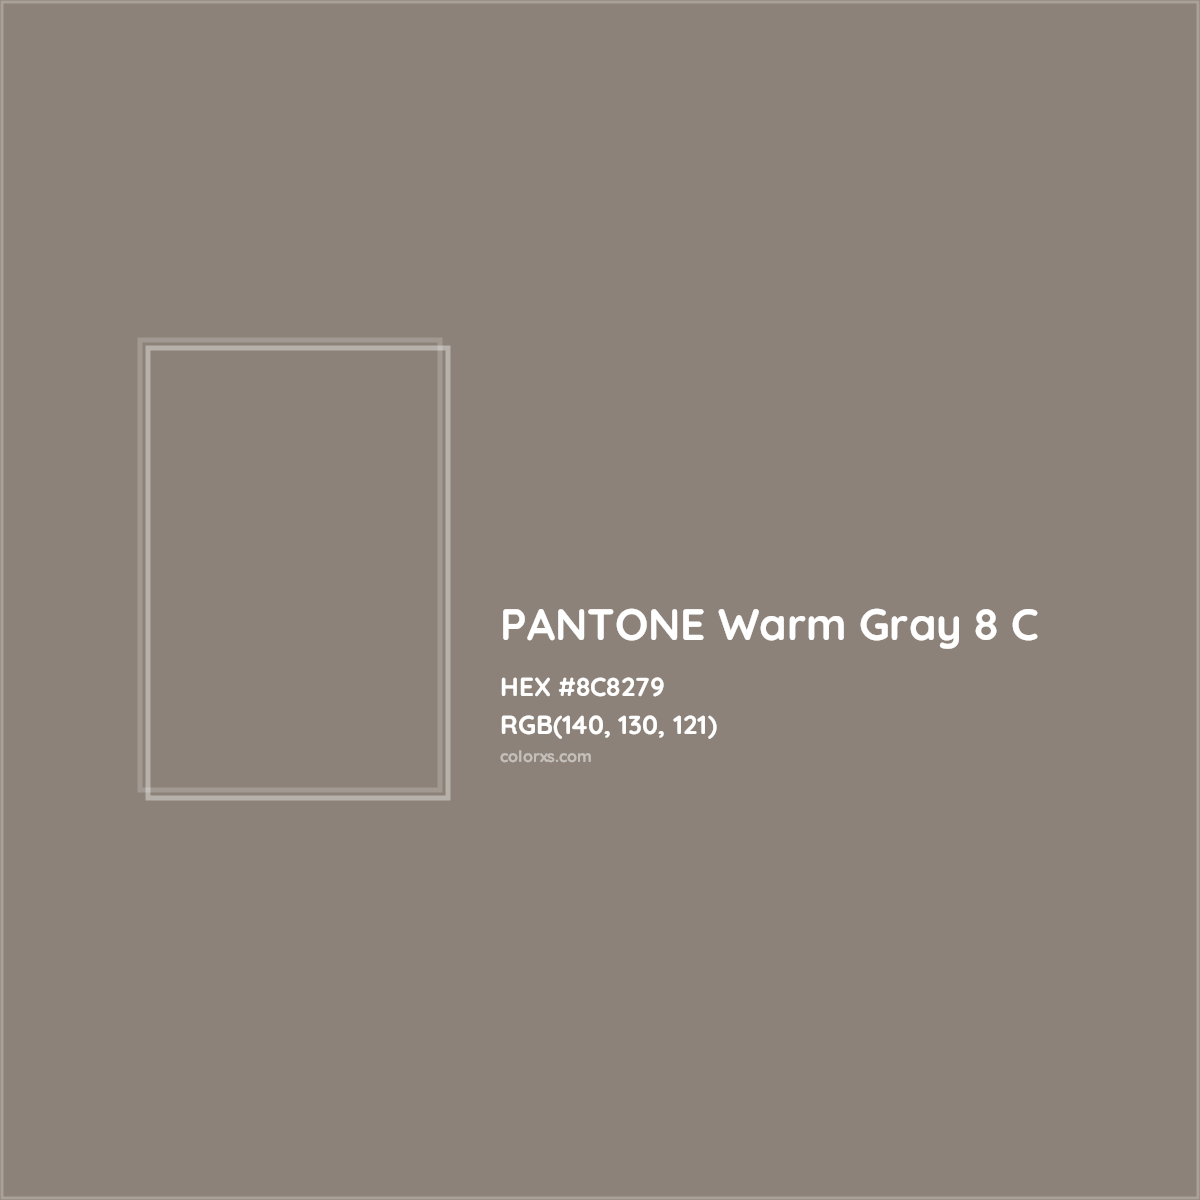 About Pantone Warm Gray 8 C Color Color Codes Similar Colors And